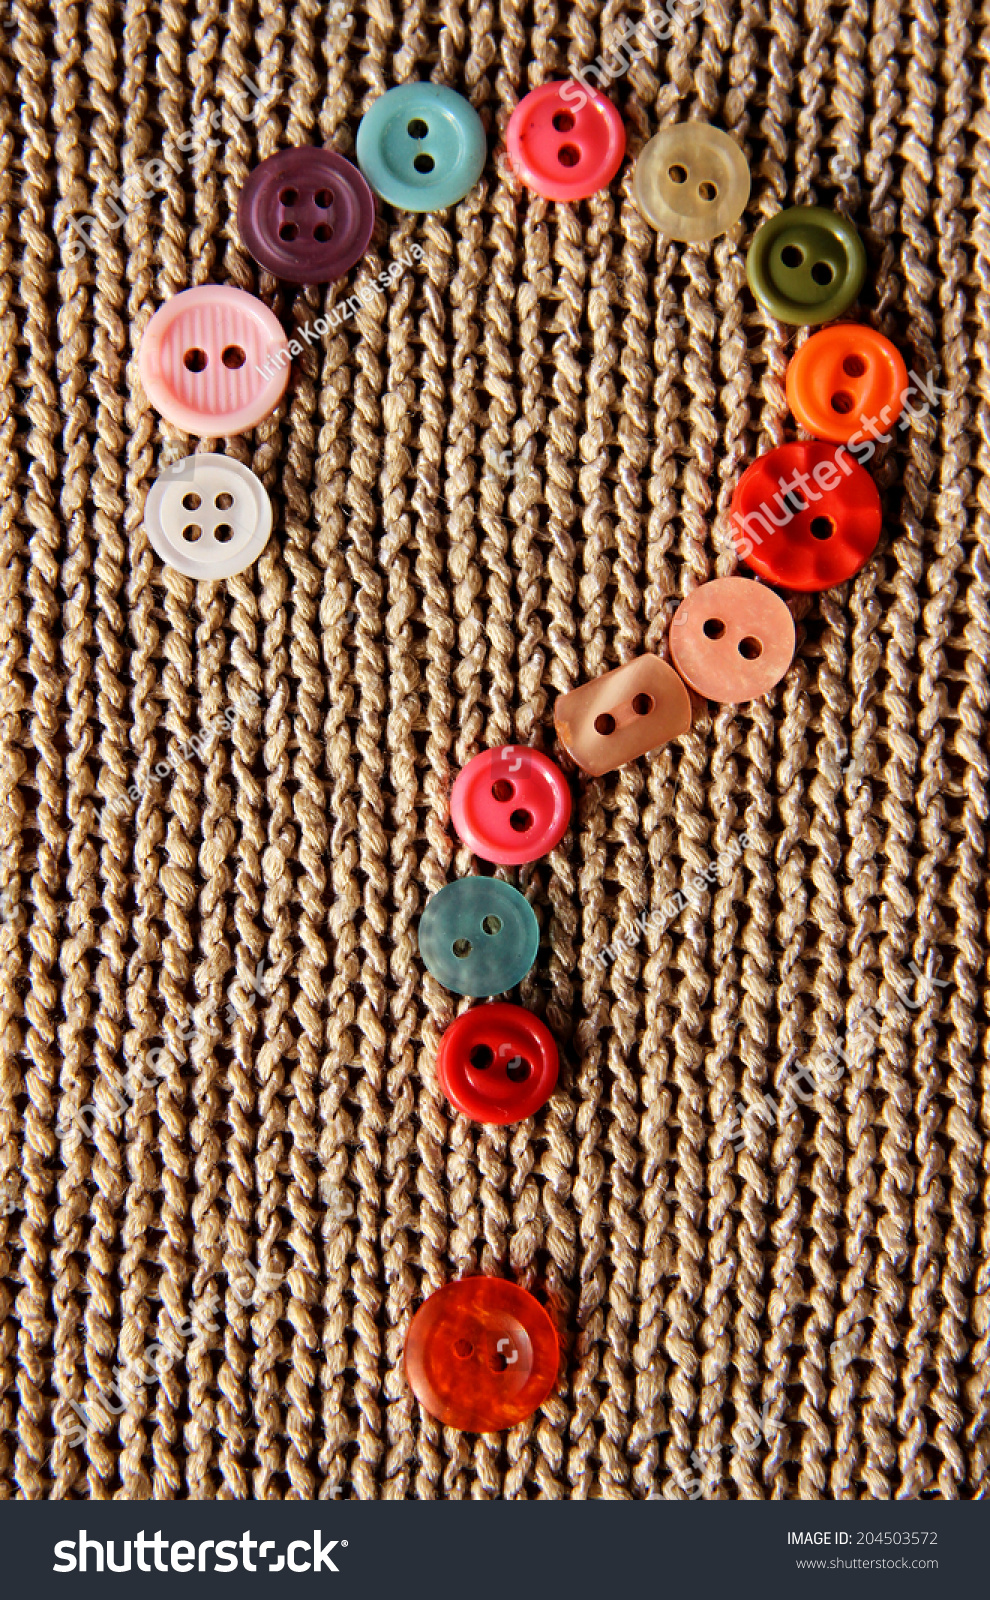 question mark from made in colorful buttons on knitted natural background #204503572